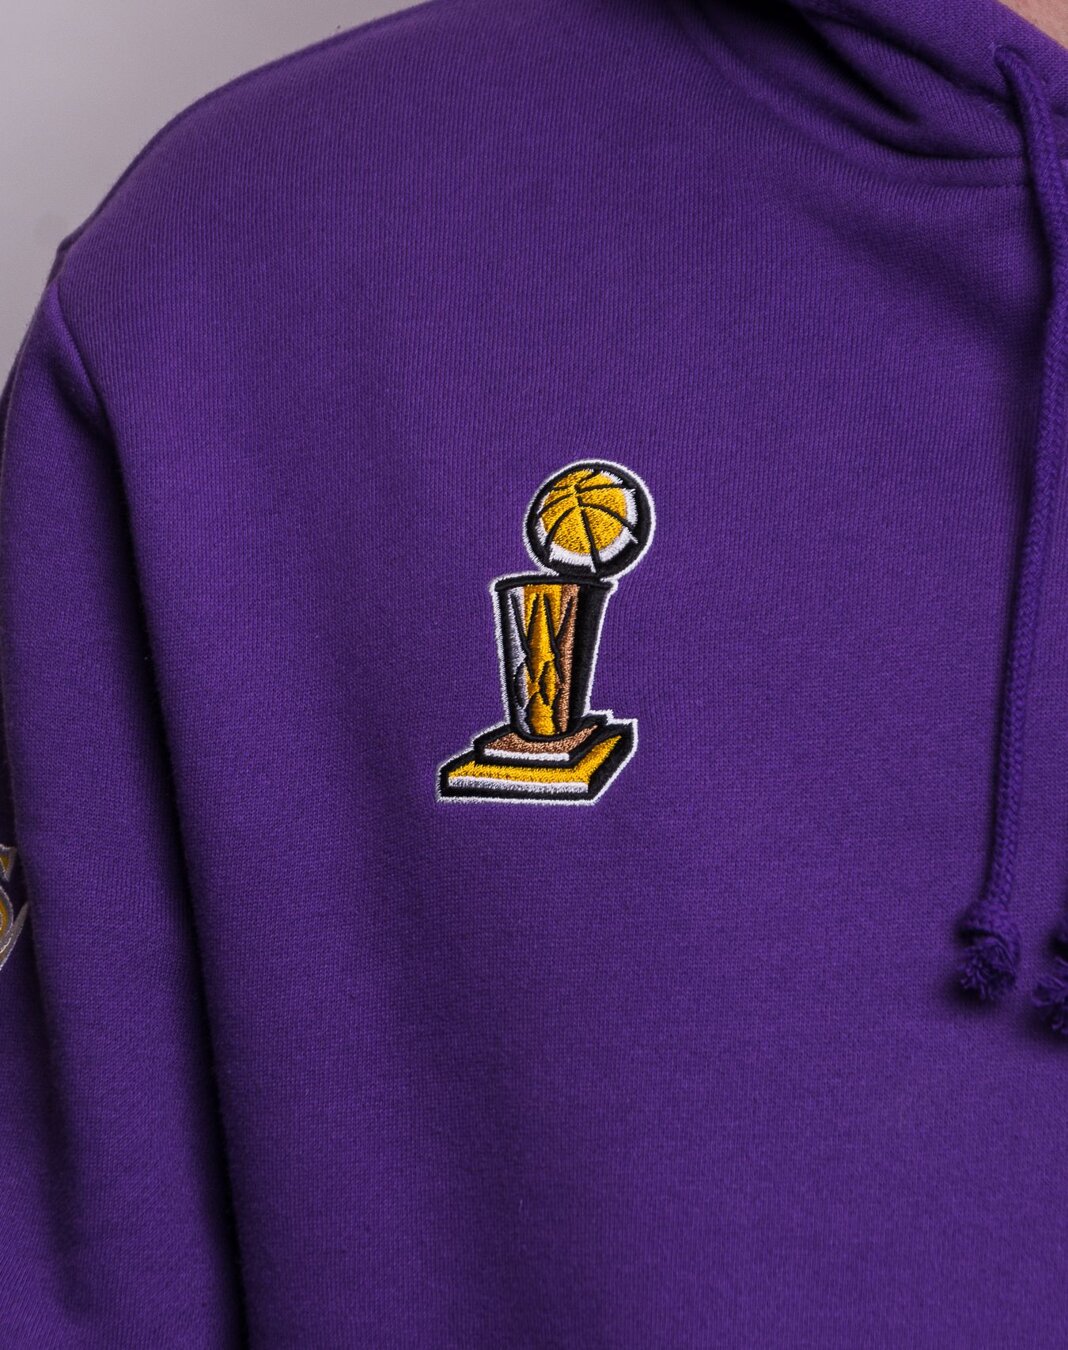 MITCHELL & NESS Los Angeles Lakers Champ City Hoodie FPHD3236-LALYYPPPBLCK  - Karmaloop